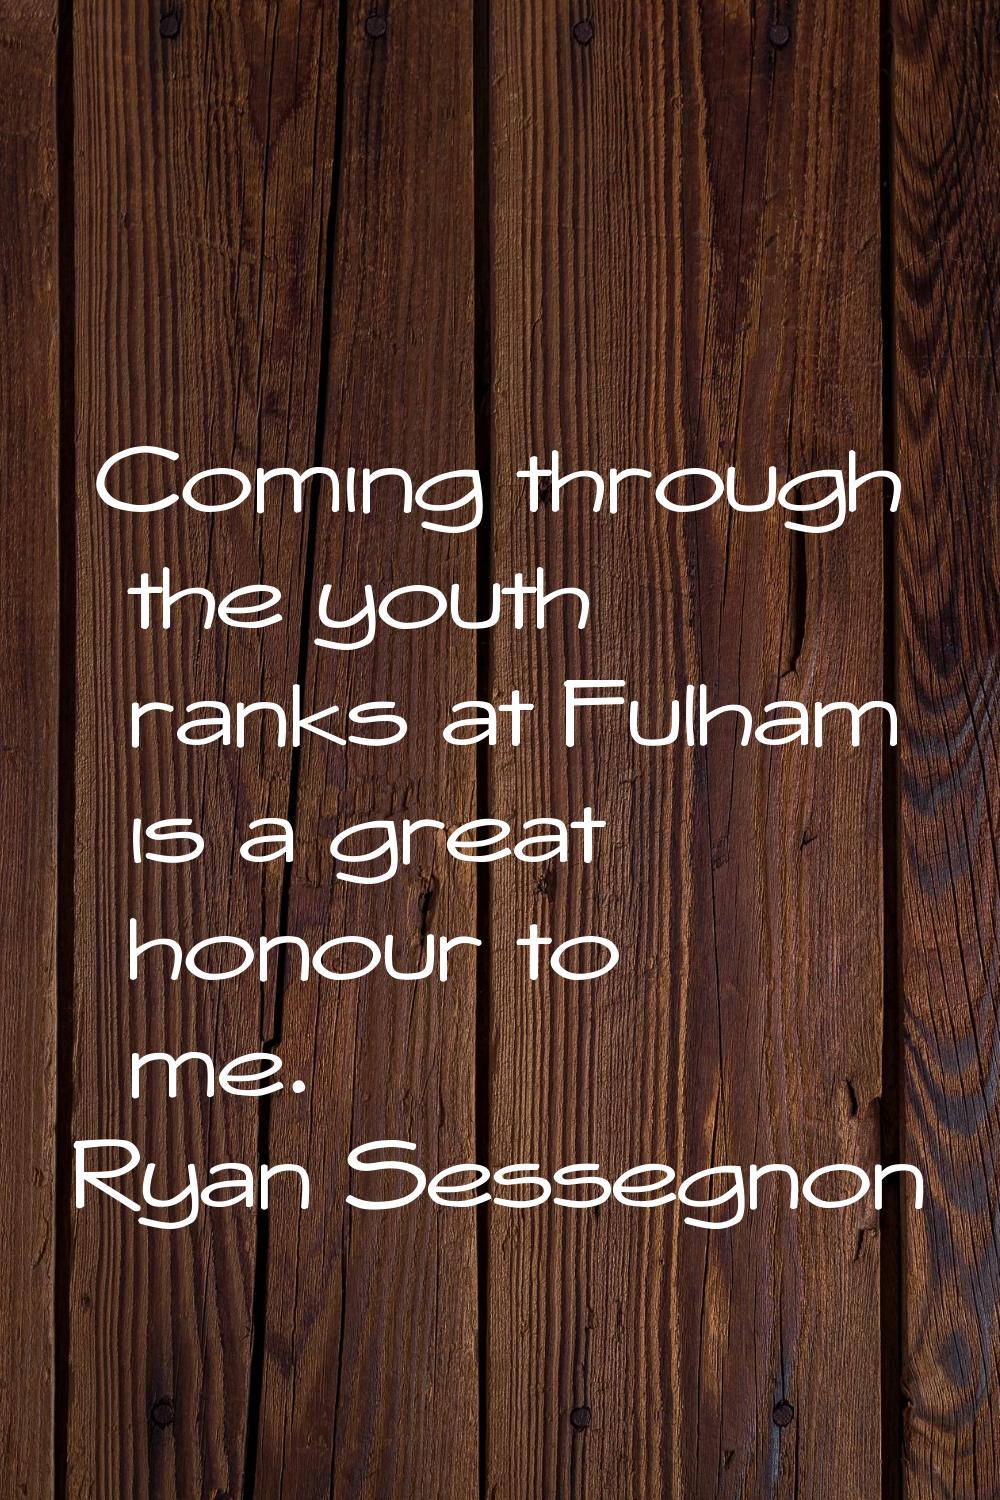 Coming through the youth ranks at Fulham is a great honour to me.